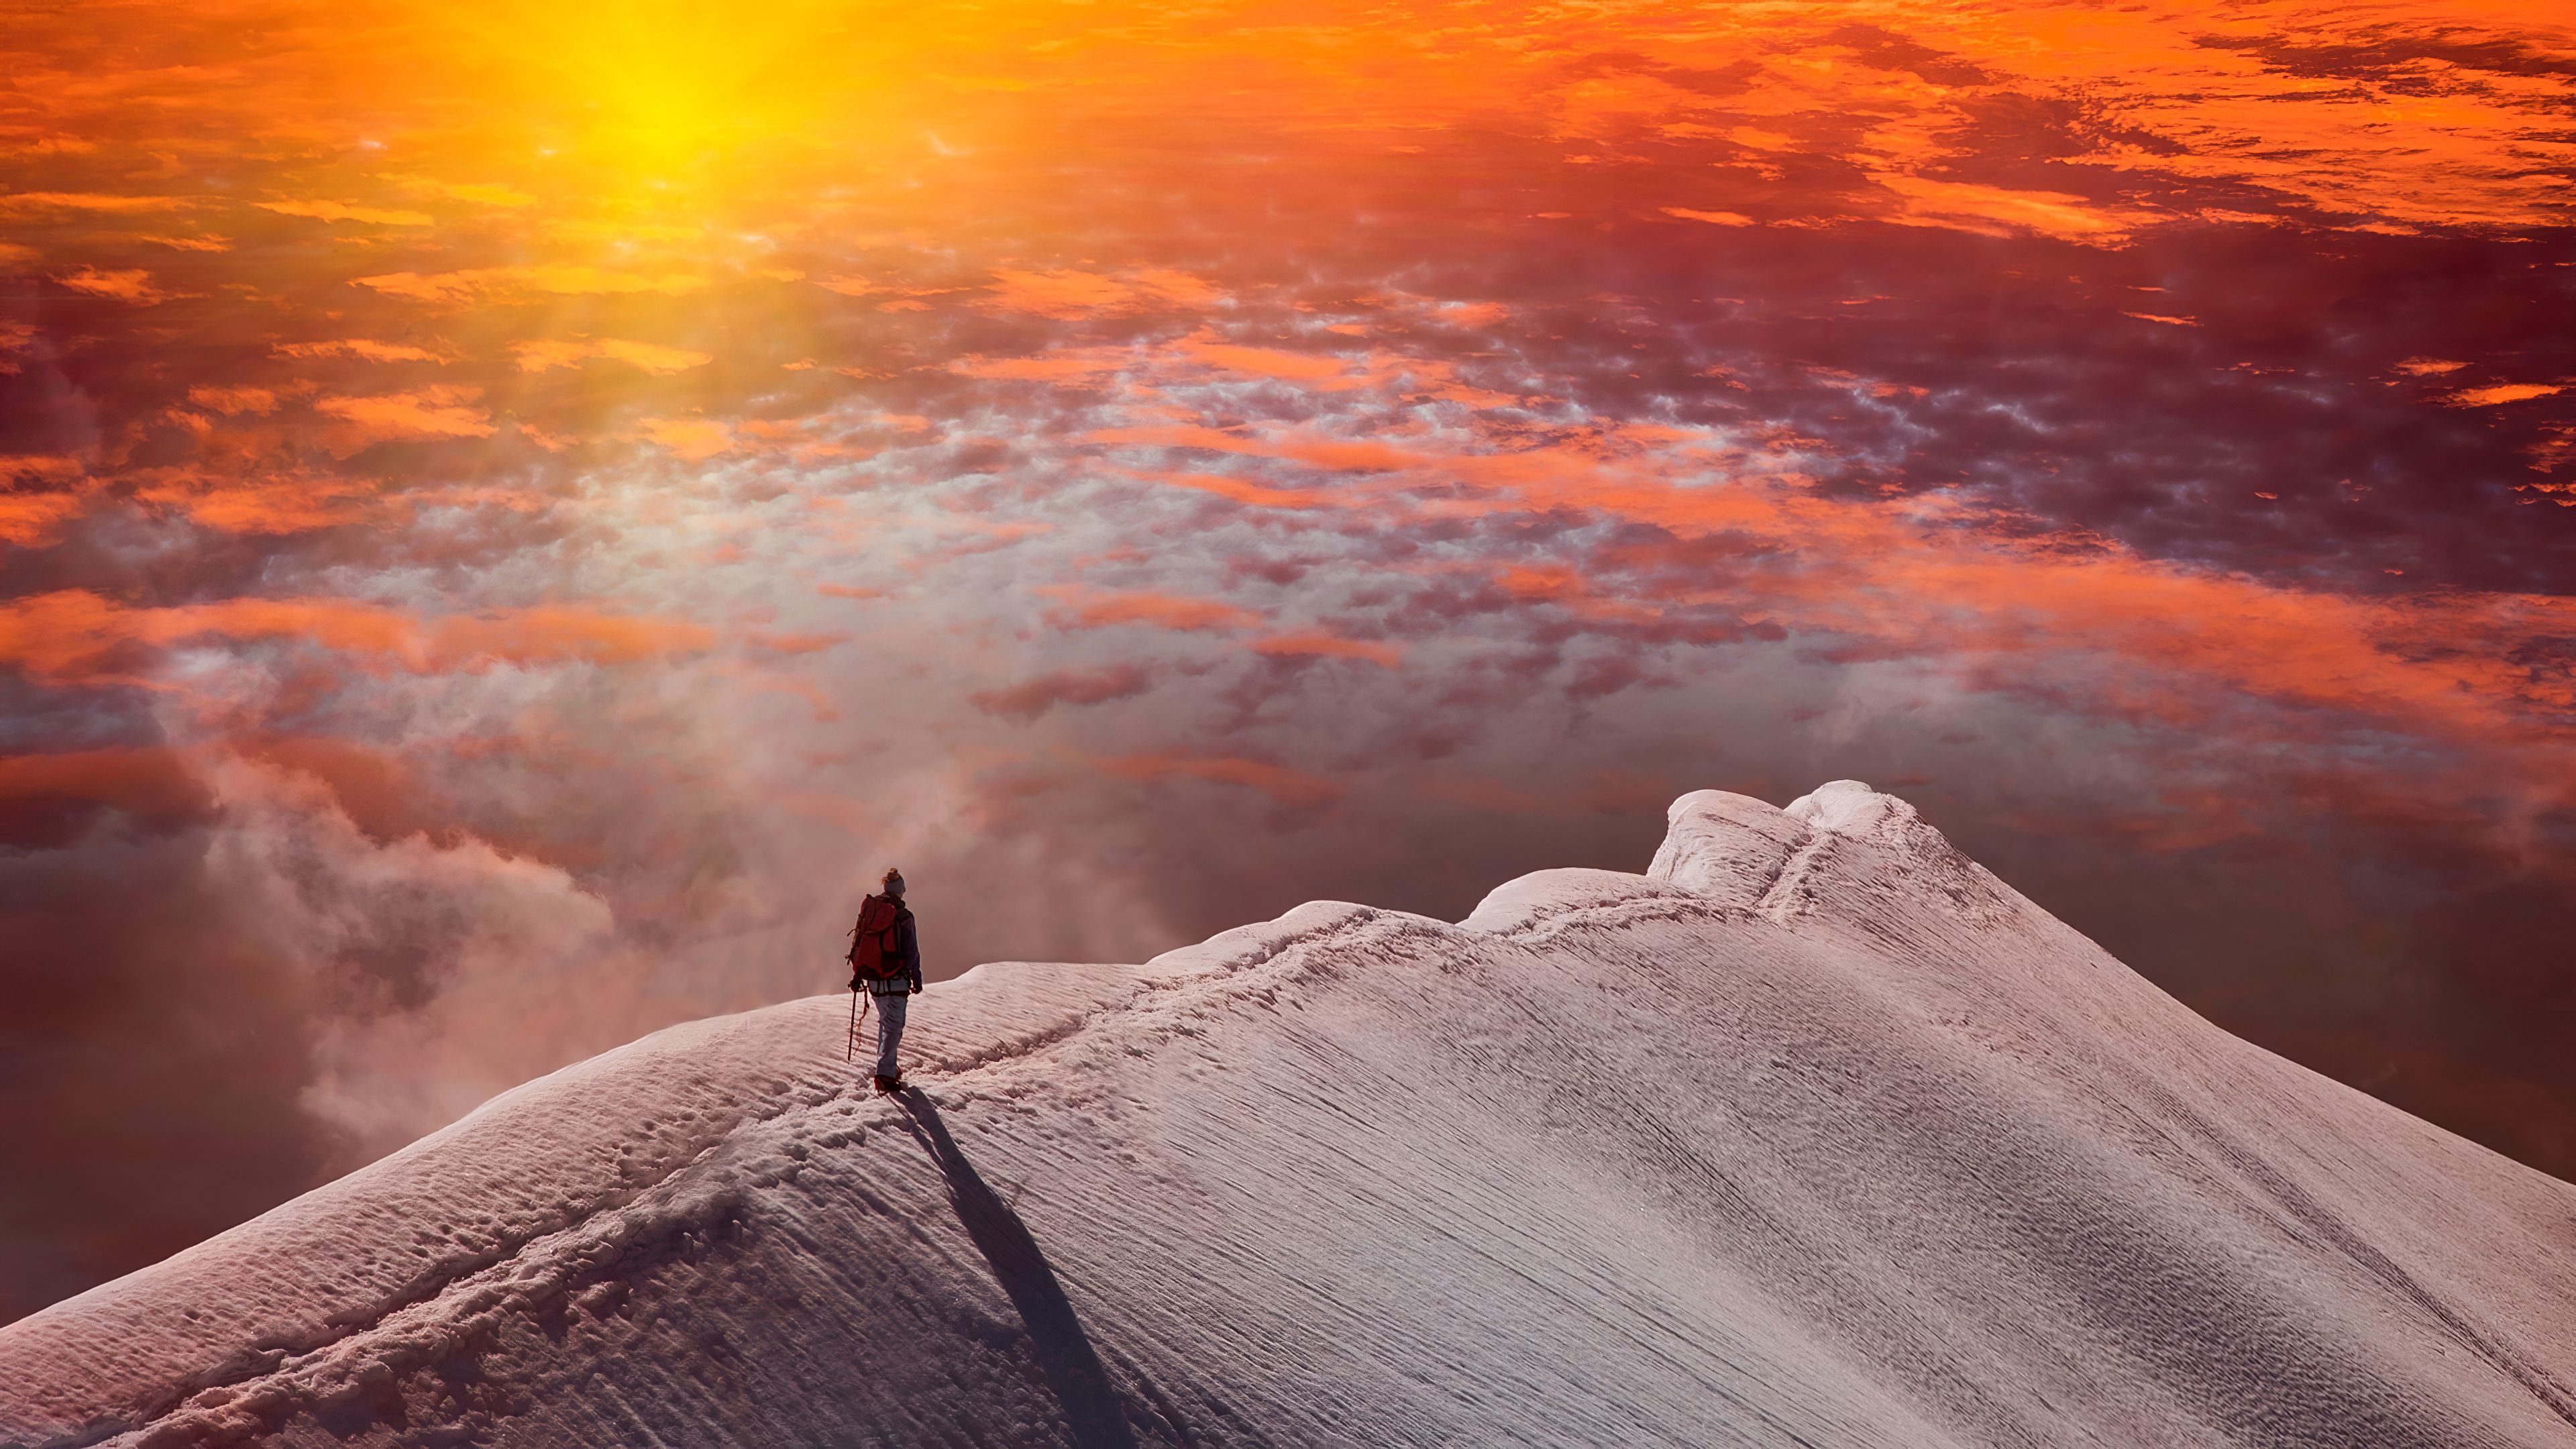 Man at the top of a mountain Wallpaper 4k Ultra HD